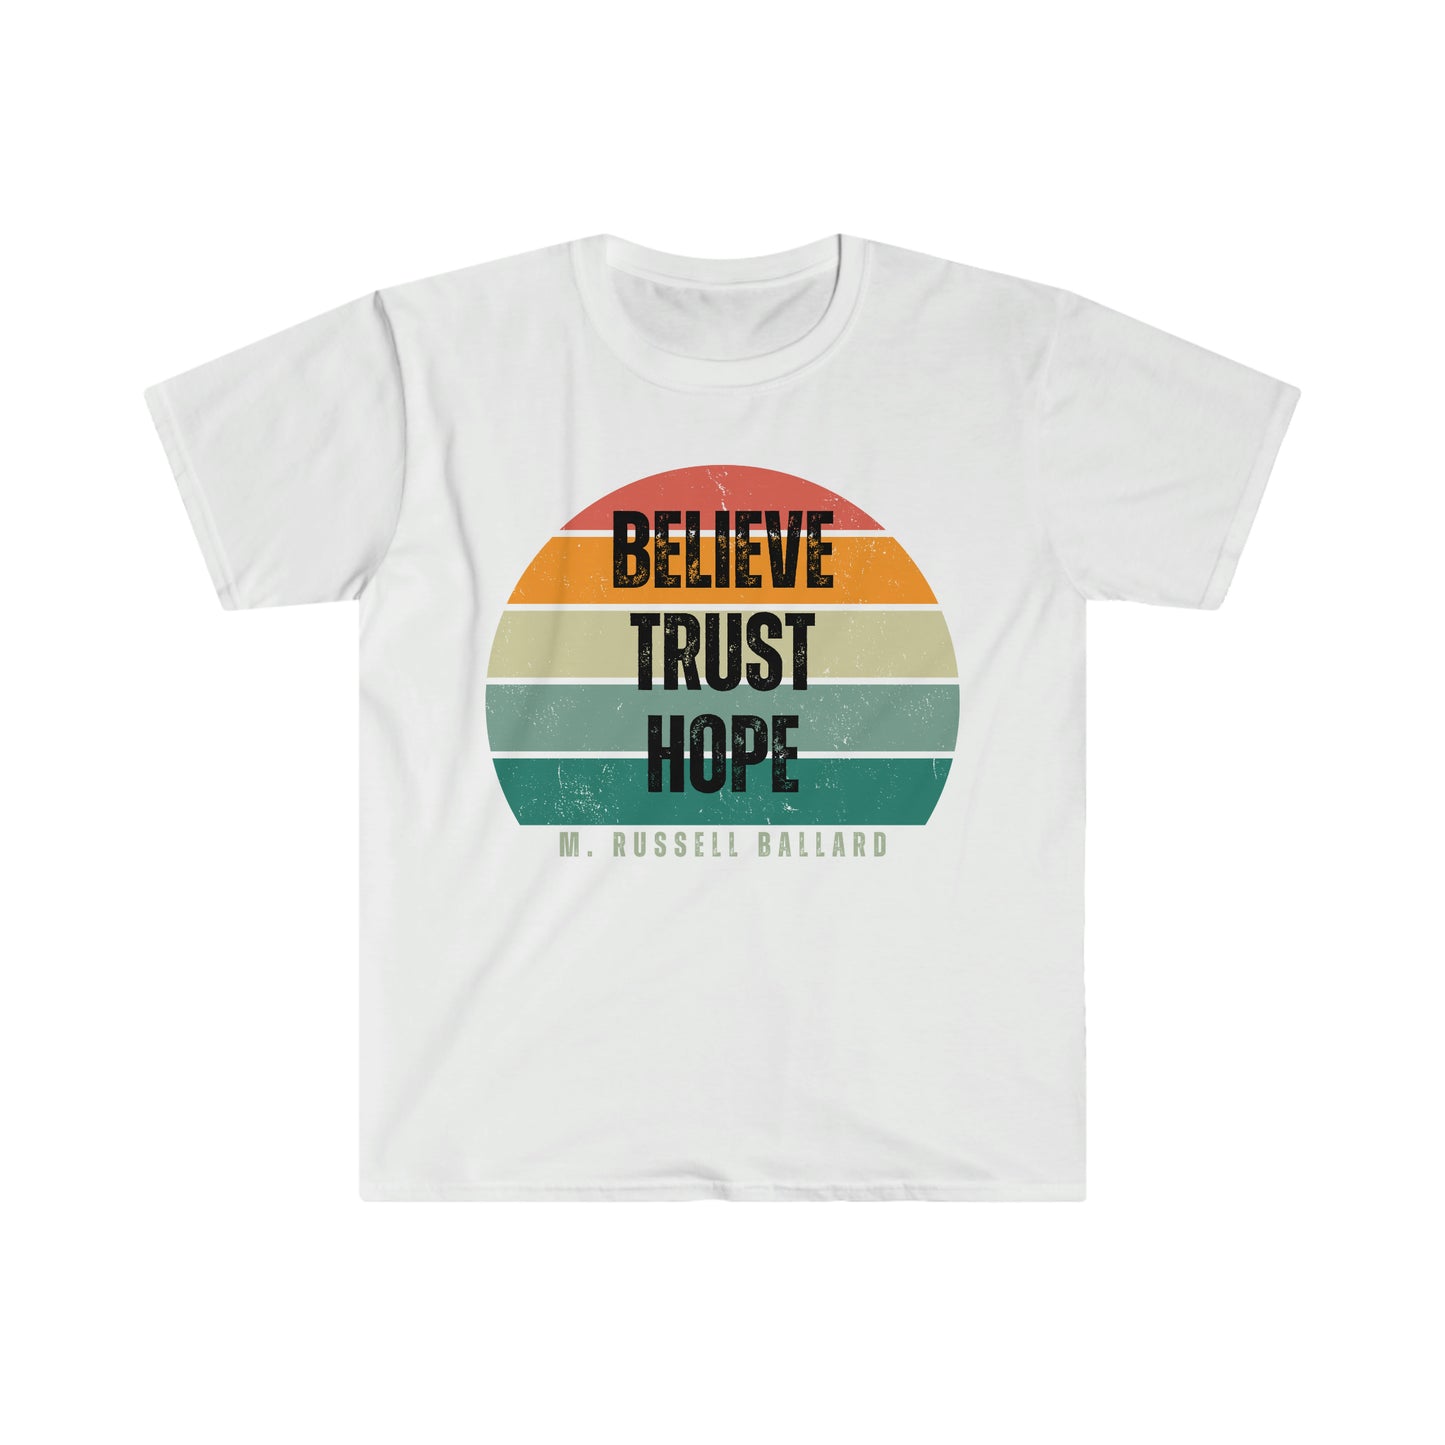 Unisex Softstyle T-Shirt, Believe, Trust, Hope T-Shirt, Religious Shirt, Christian Shirt, Christian Gift, LDS Ministering Gift